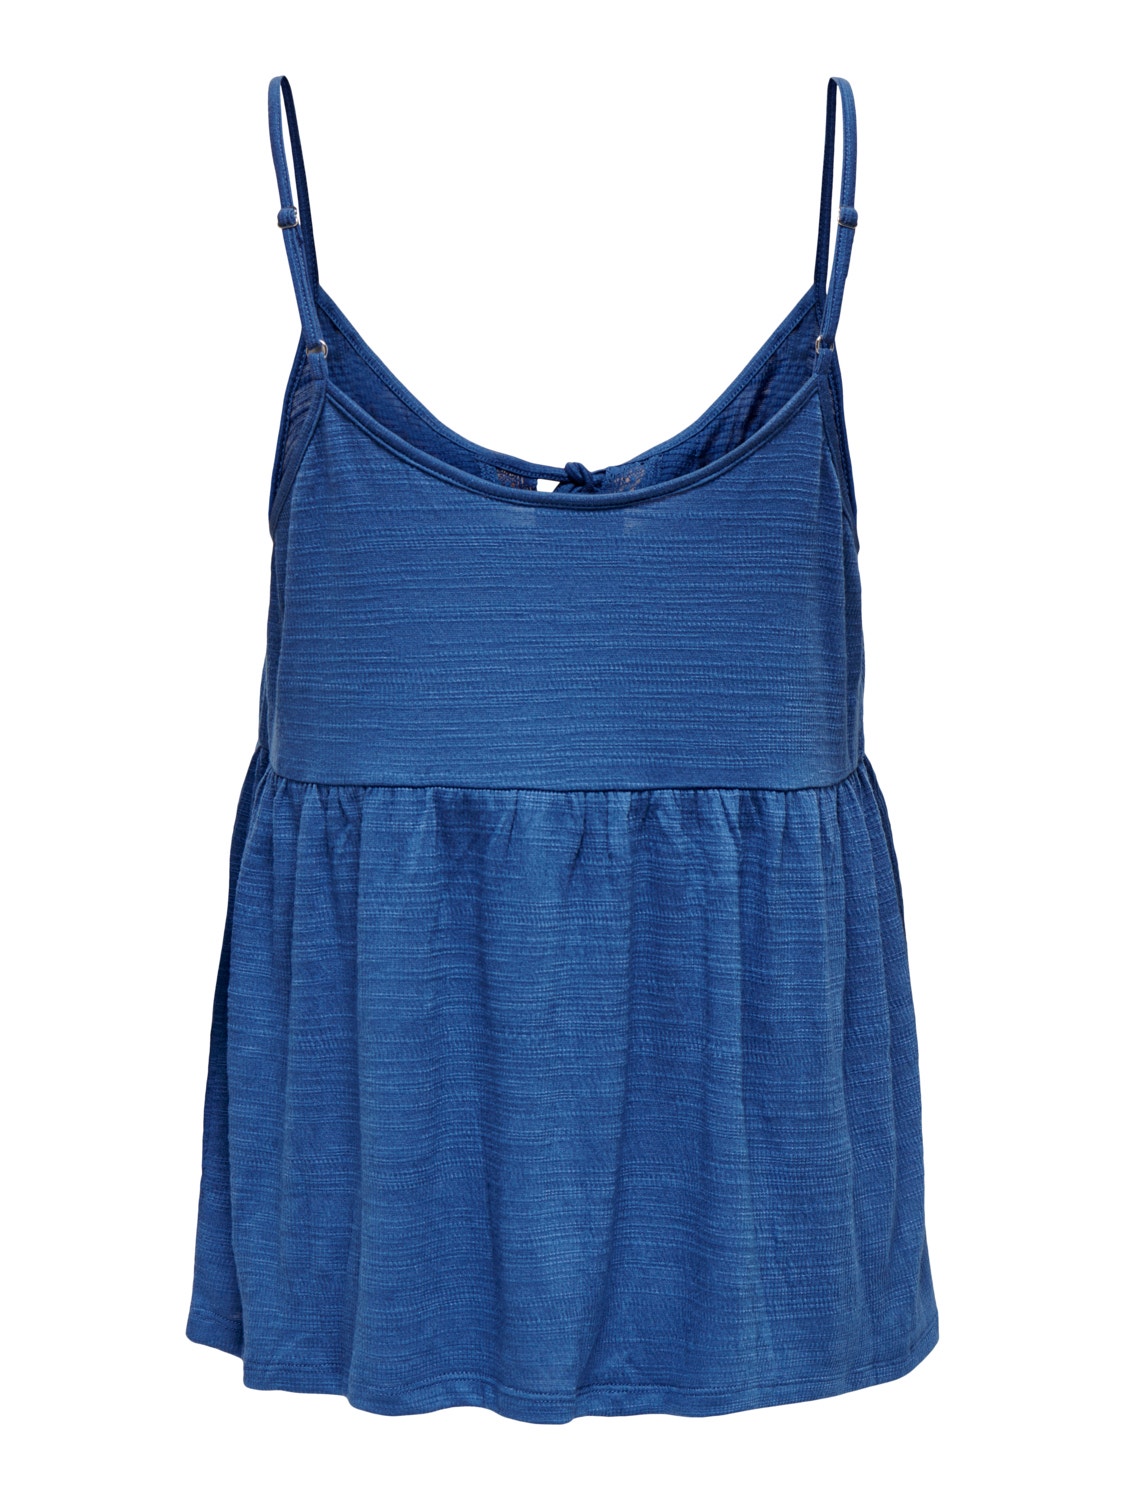 ONLY Mama sleeveless top -Federal Blue - 15272310